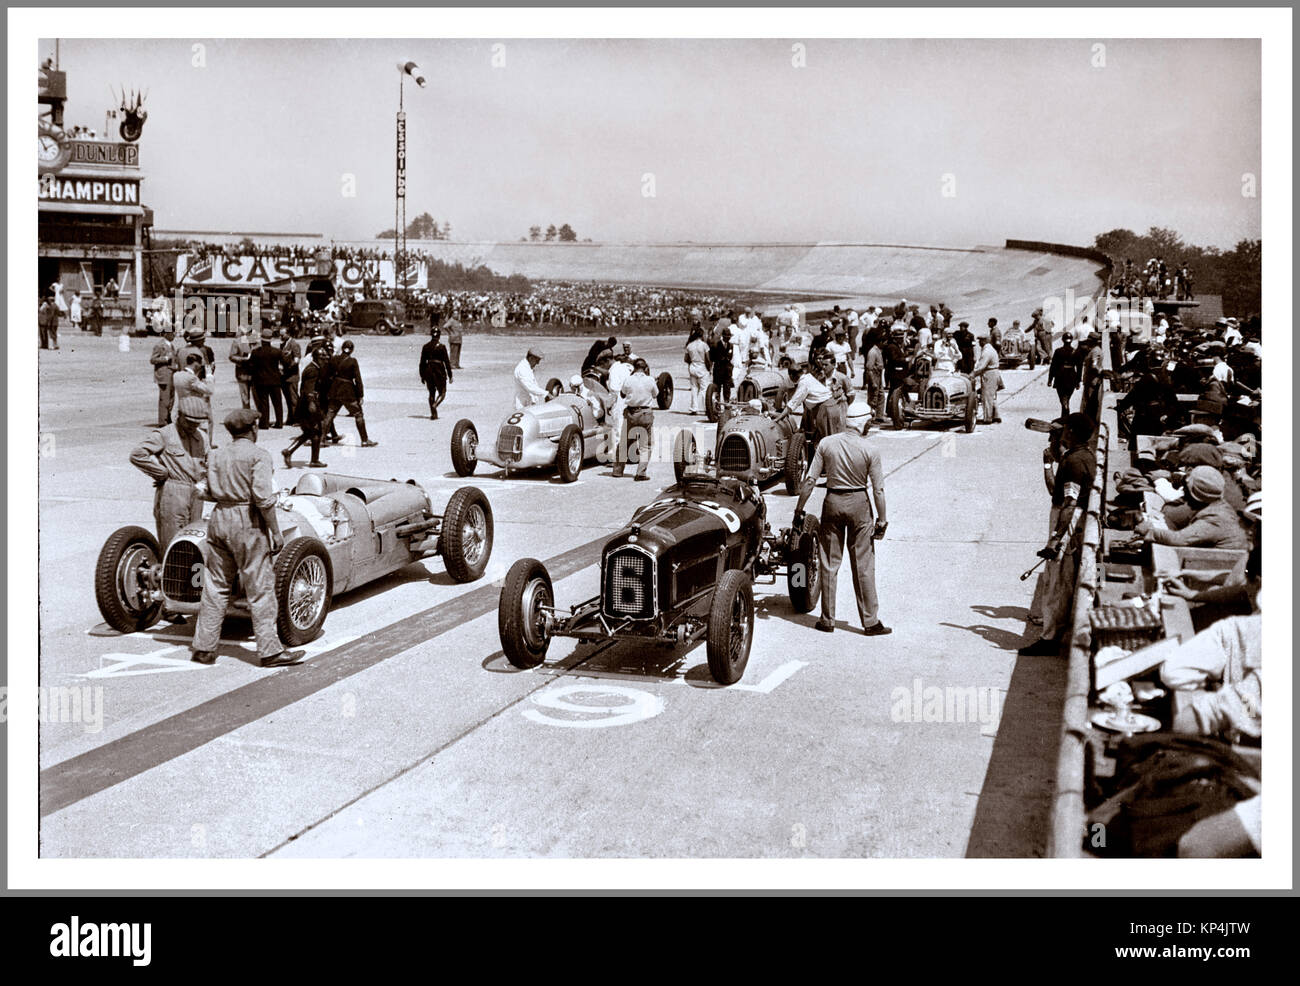 The 1934 French Grand Prix (formally the XXVIII Grand Prix de l'Automobile Club de France) was a Grand Prix motor race held on 1 July 1934 at Montlhéry. The race comprised 40 laps of a 12.5 km circuit, for a total race distance of 500.0 km. This is the first race where the Mercedes Benz Silver Arrows 'Silberpfeile' and Auto Union) were entered. Stock Photo